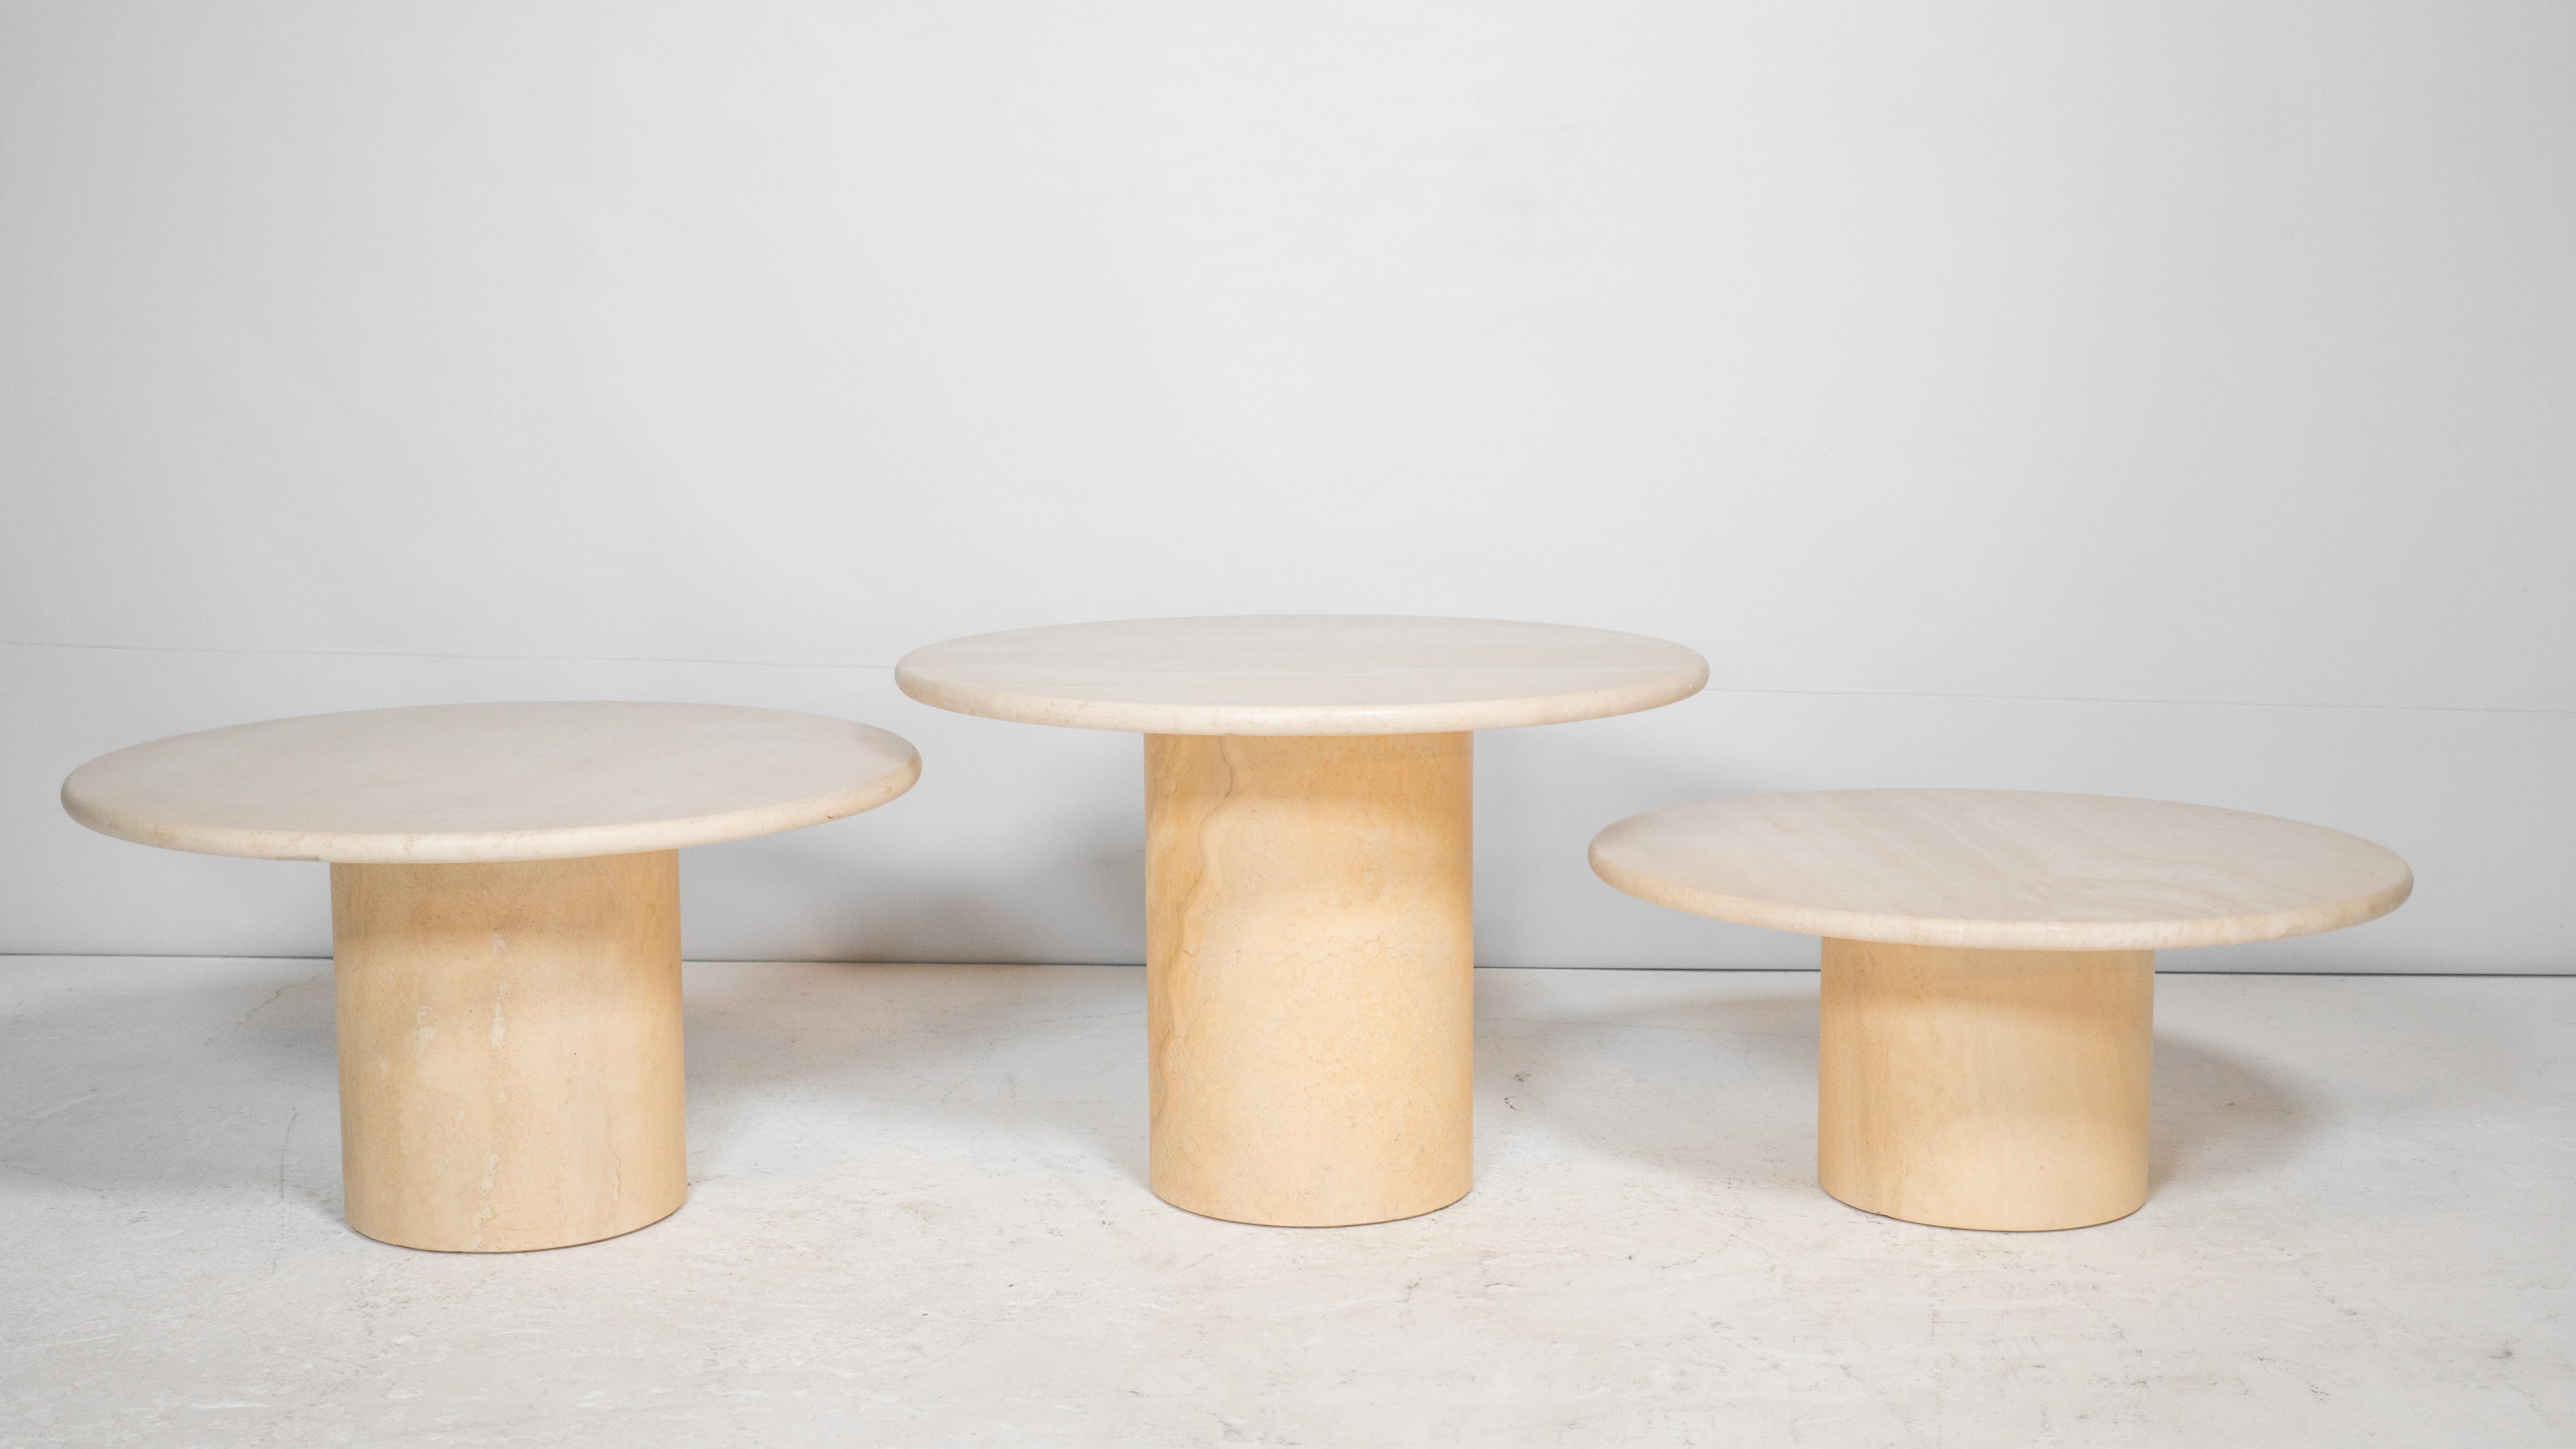 Late 20th Century Vintage Travertine Round Pedestal Tiered Coffee Tables - Set of 3